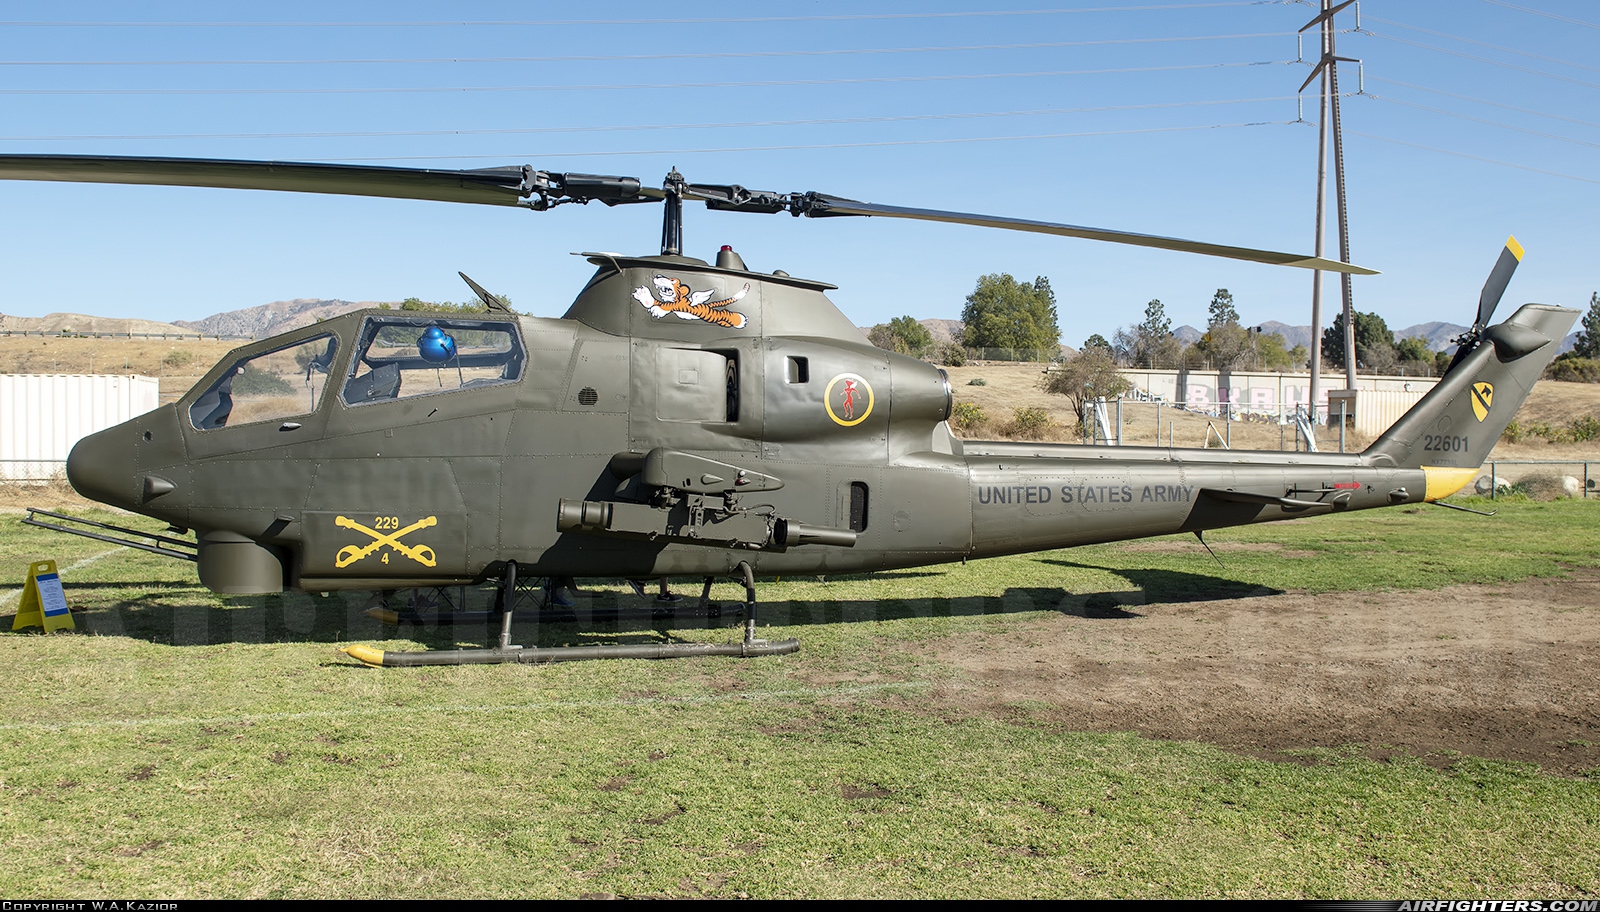 Private - Olympic Flight Museum Bell AH-1S Cobra N7239L at Off-Airport - Los Angeles - Hansen Dam Park, USA